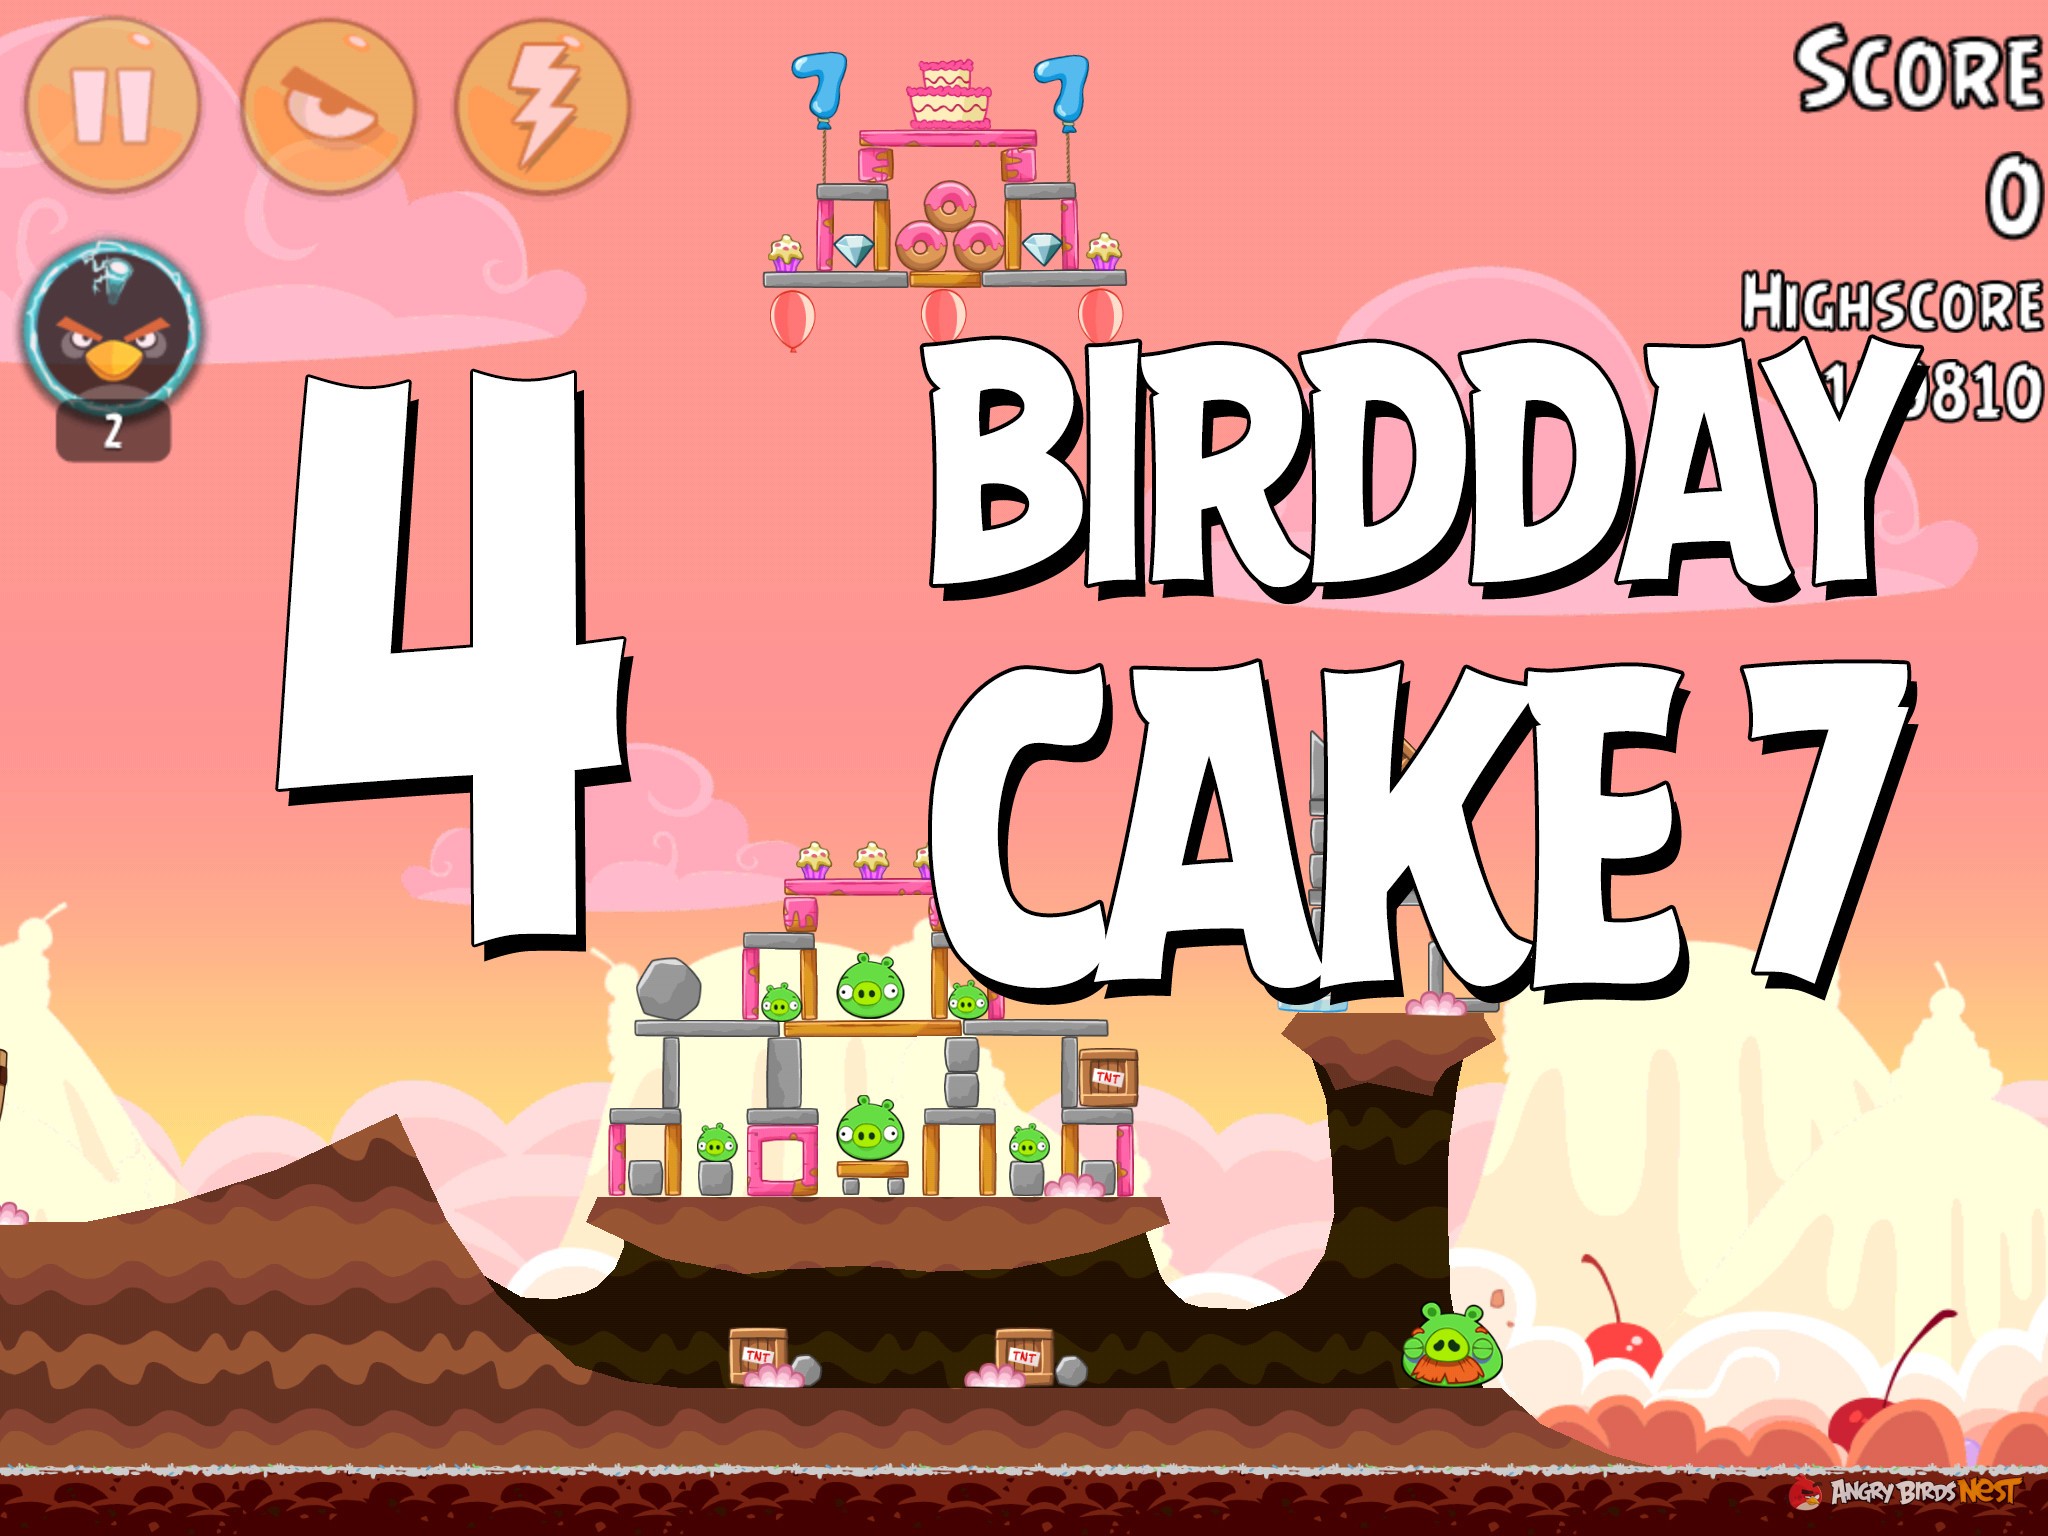 Angry-Birds-Birdday-Party-Cake-7-Level-4